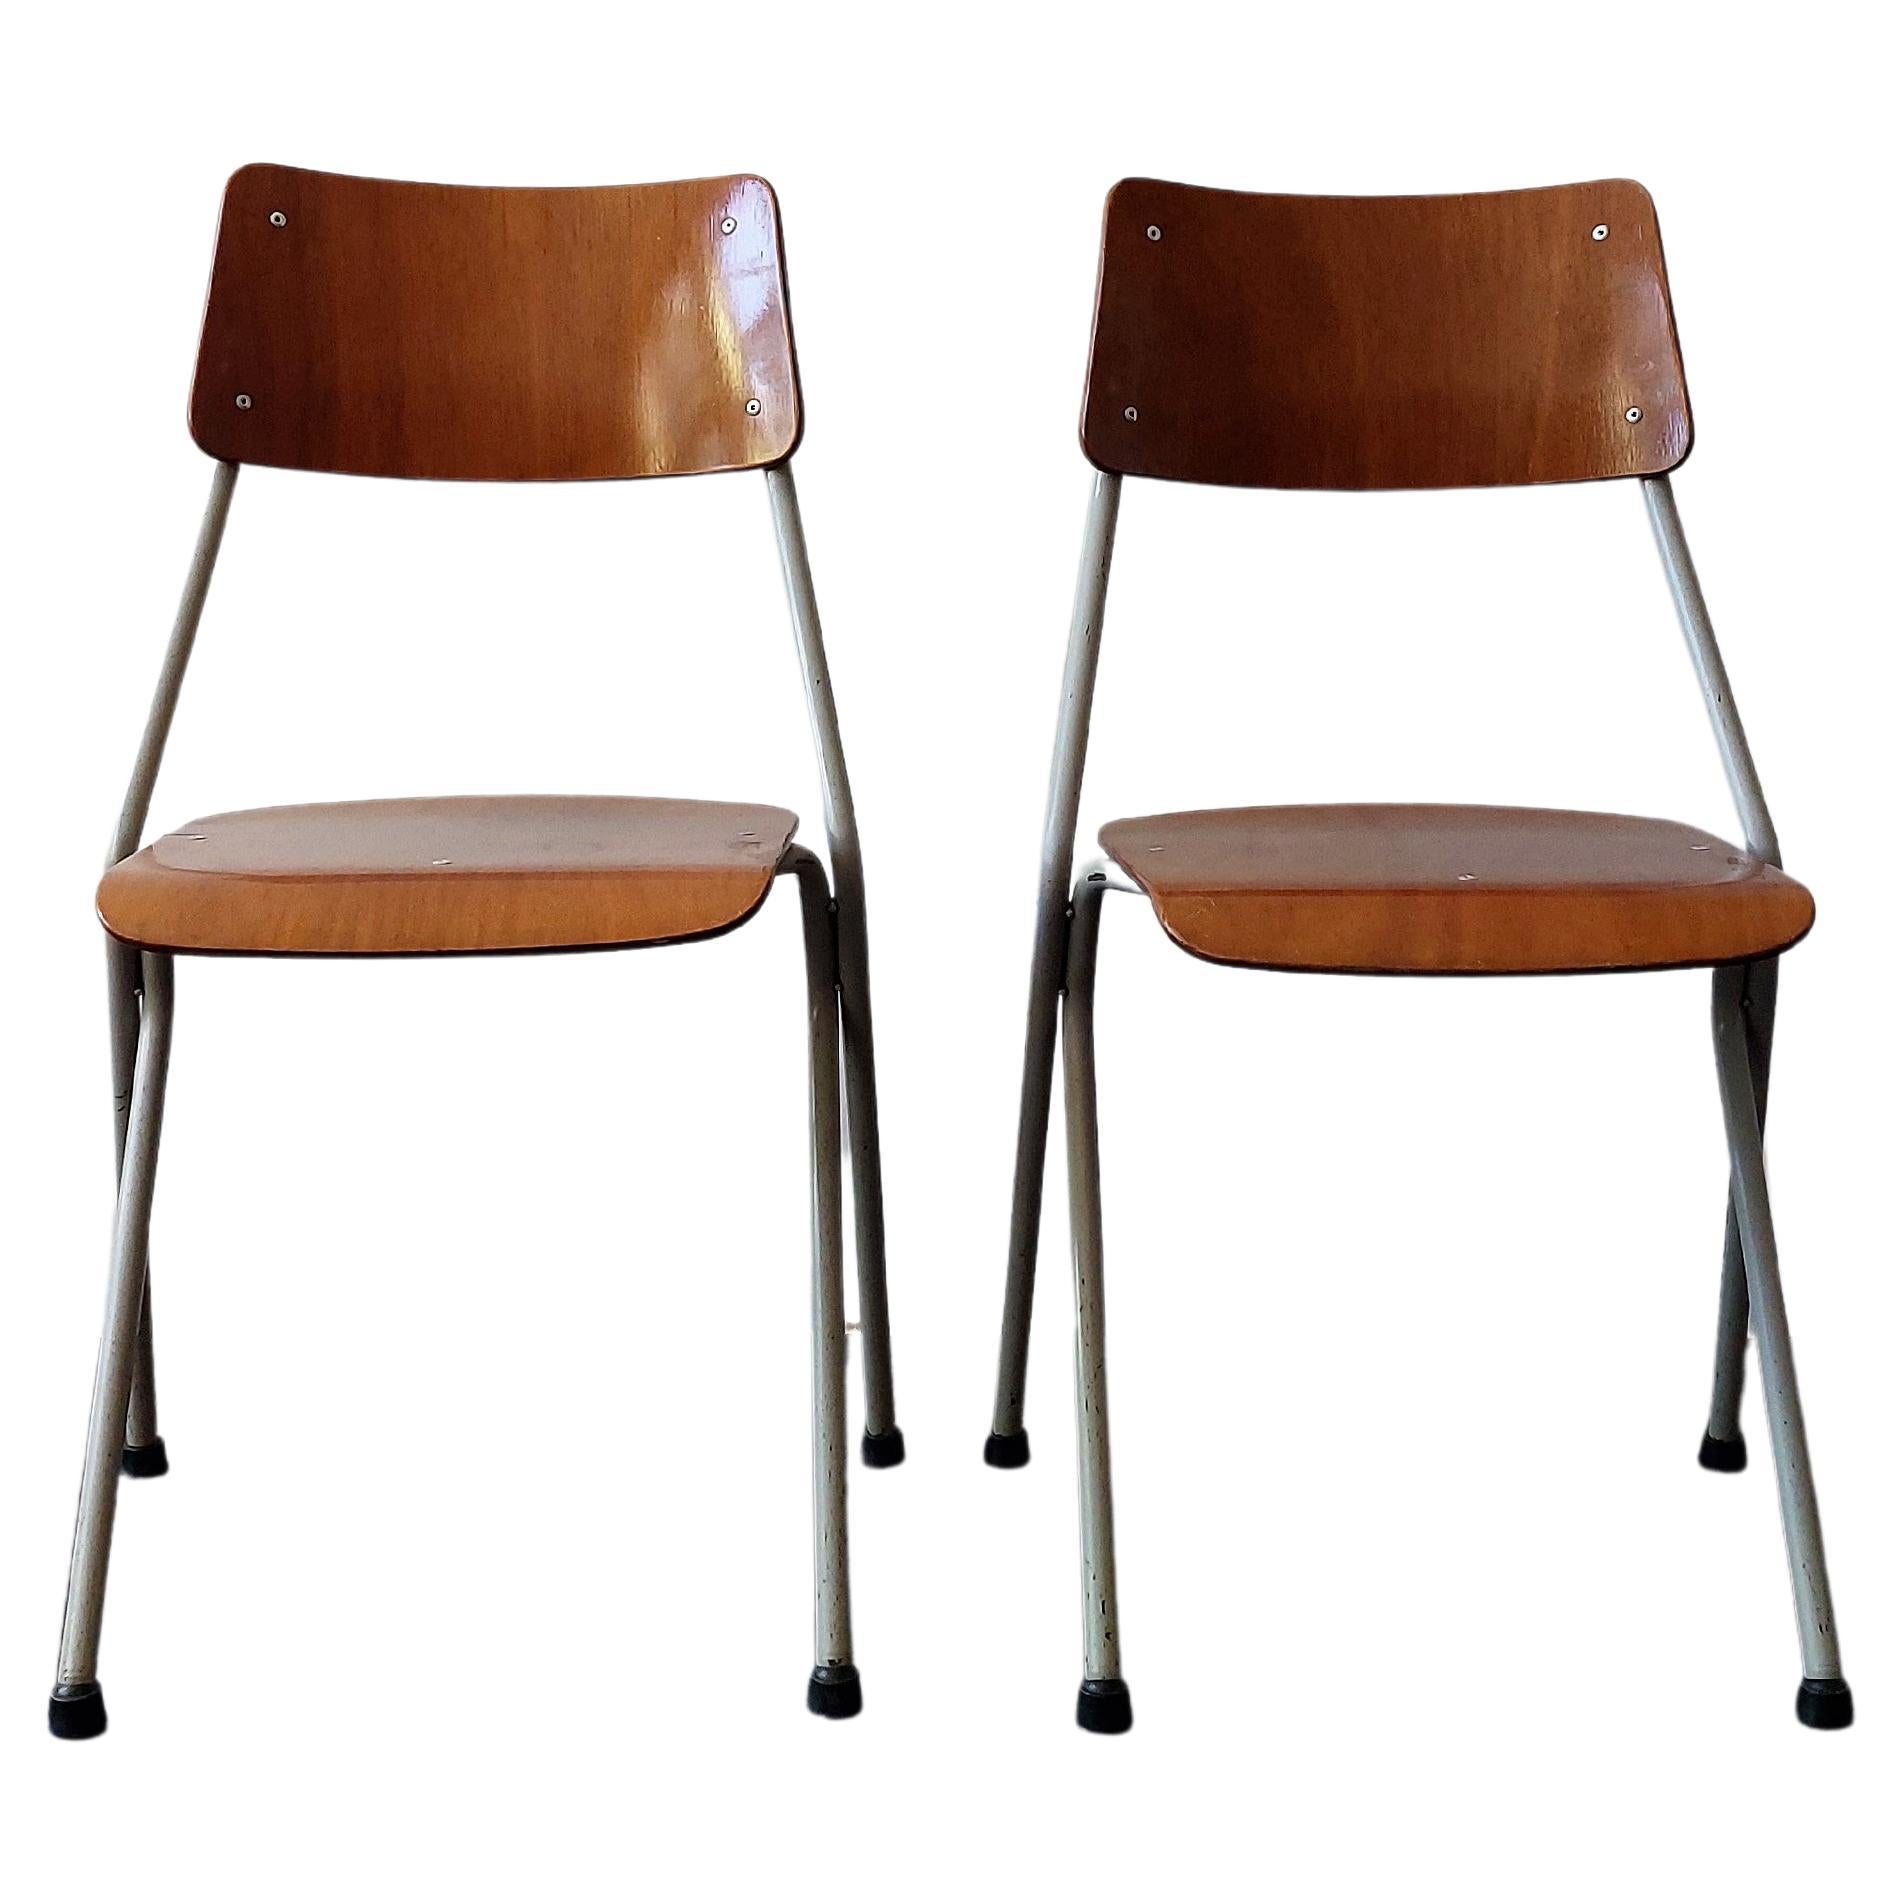 https://a.1stdibscdn.com/set-of-2-chairs-by-ahrend-rib-the-netherlands-1964-for-sale/f_18803/f_294671221657180638499/f_29467122_1657180639050_bg_processed.jpg